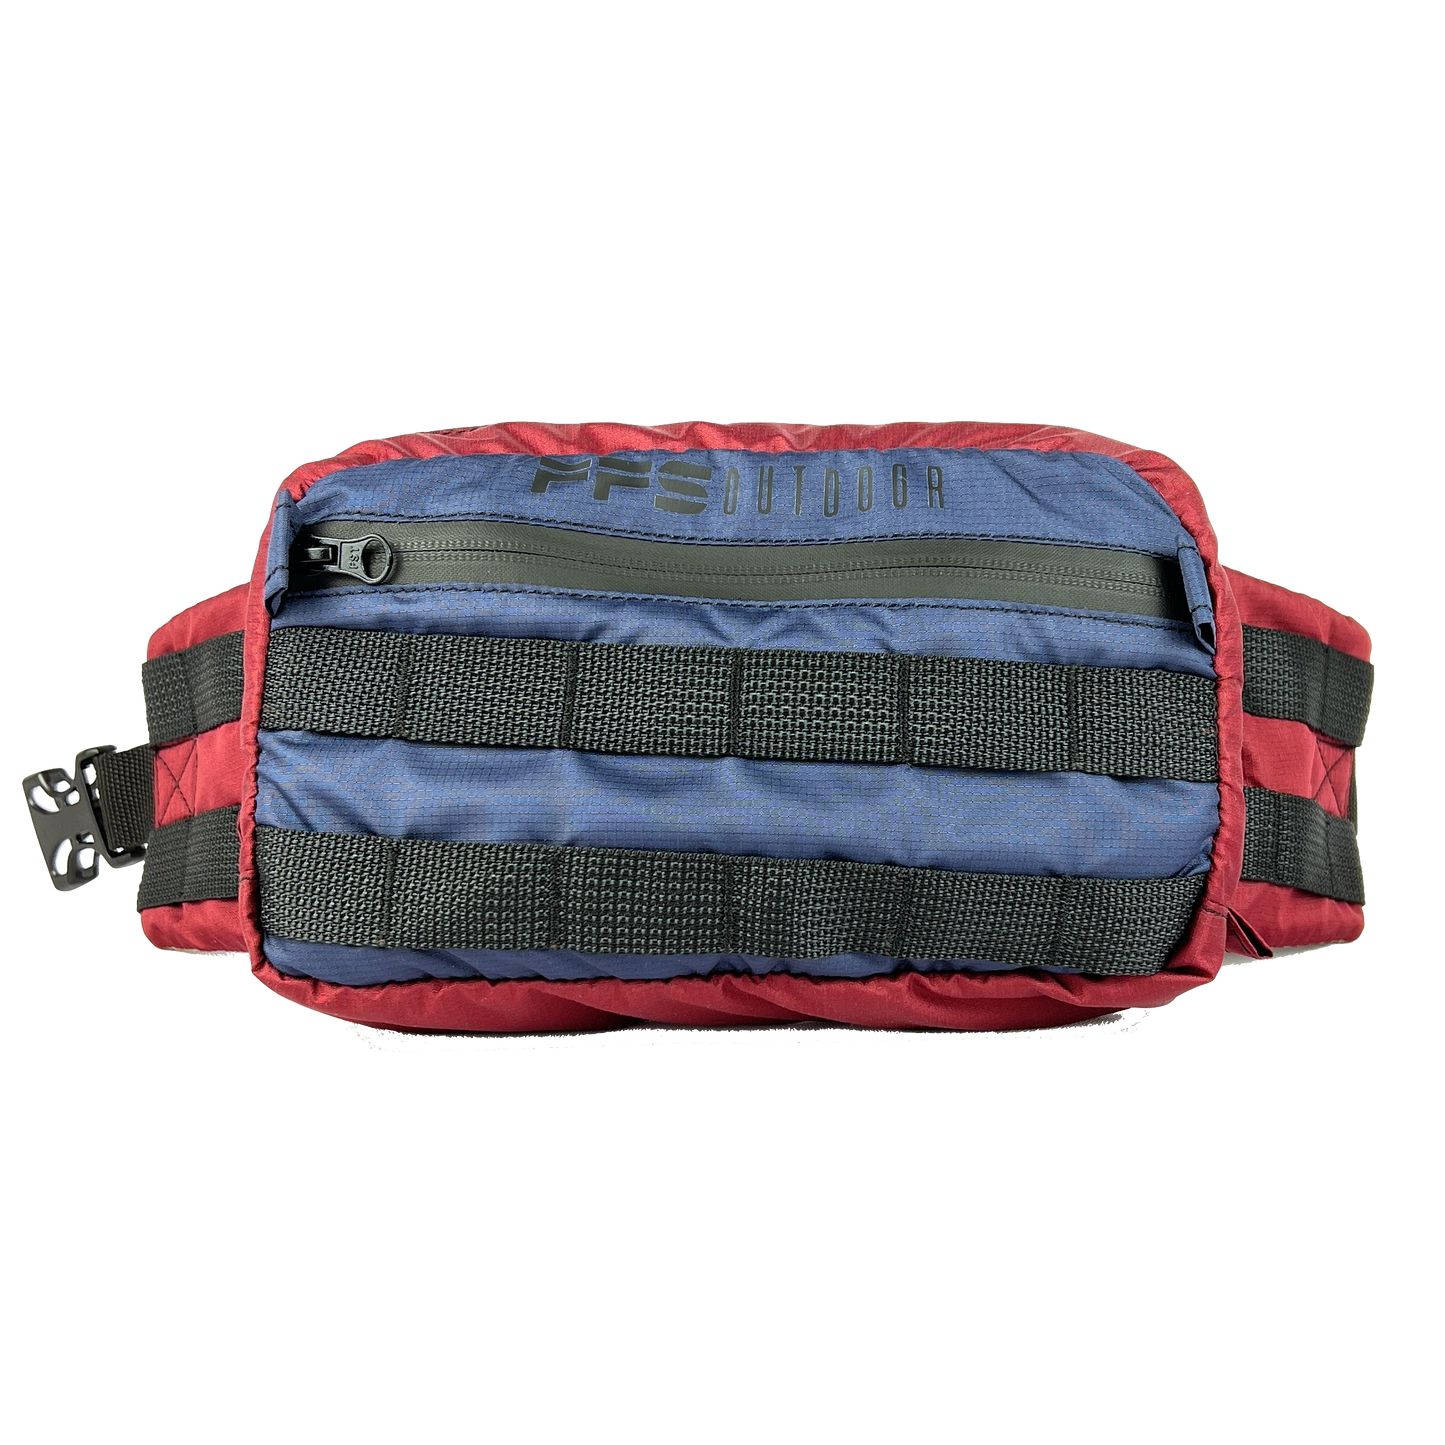 Hiking and outdoor fanny pack lumbar waist unisex